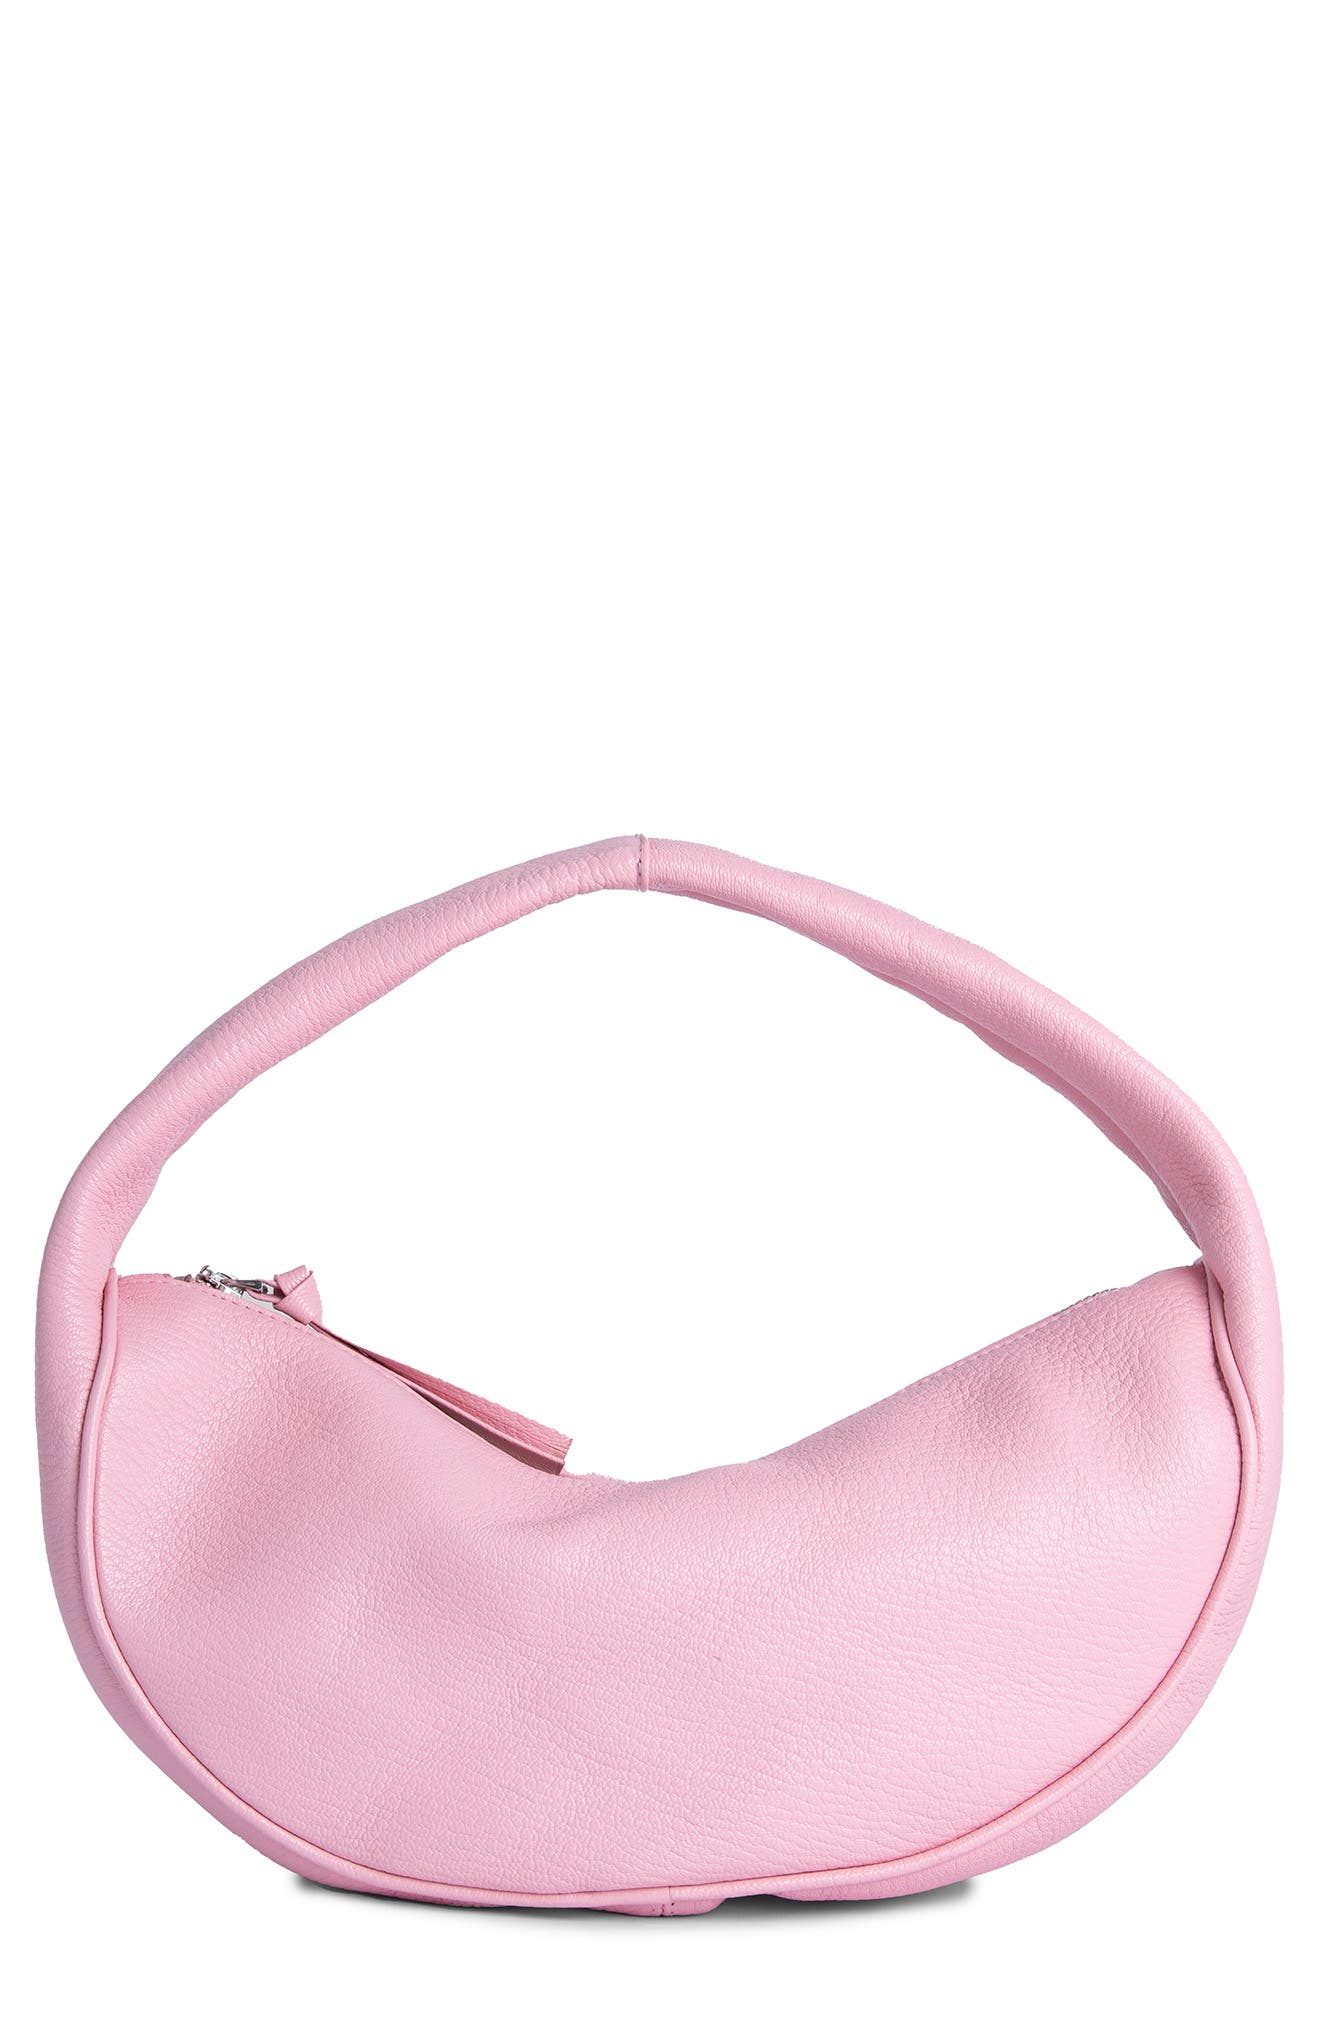 By Far Cush Leather Bag in Peony at Nordstrom